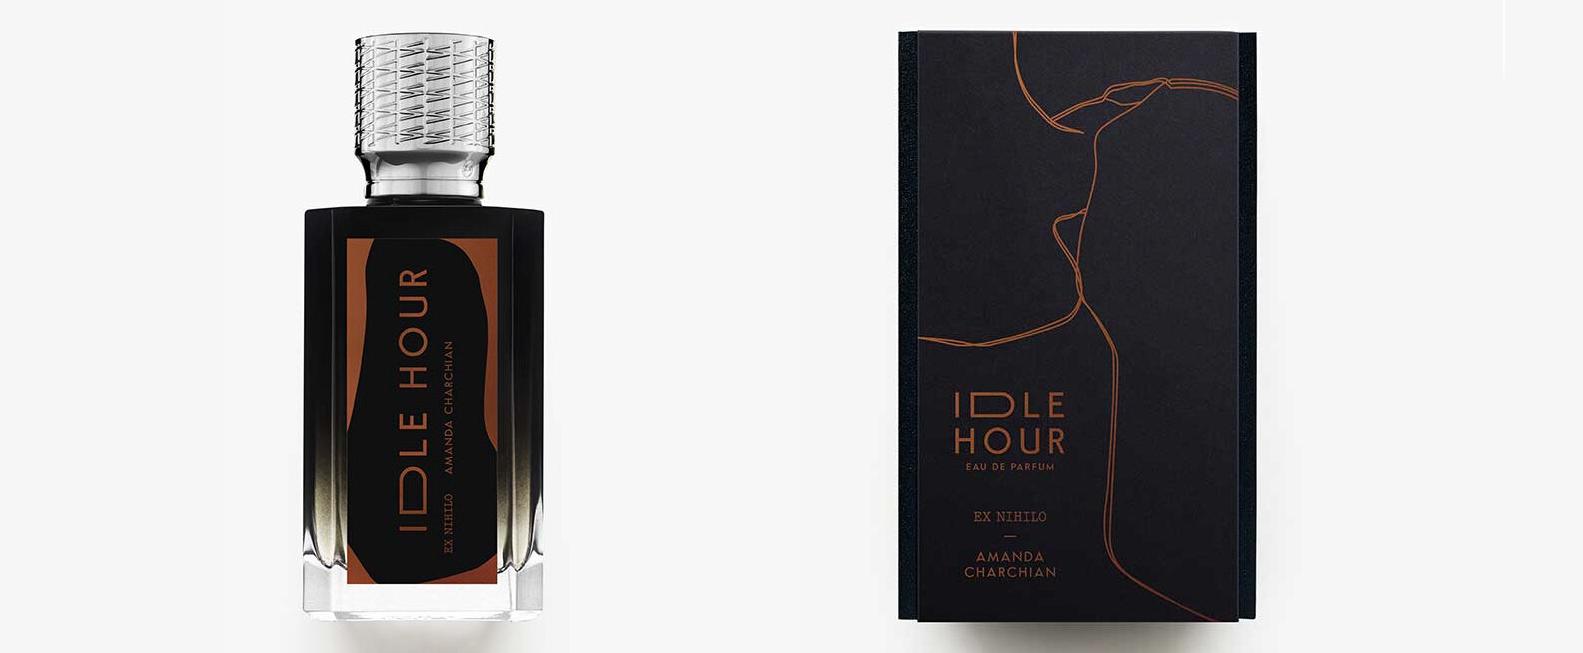 “Idle Hour” - New Perfume by Ex Nihilo in Collaboration With Amanda Charchian